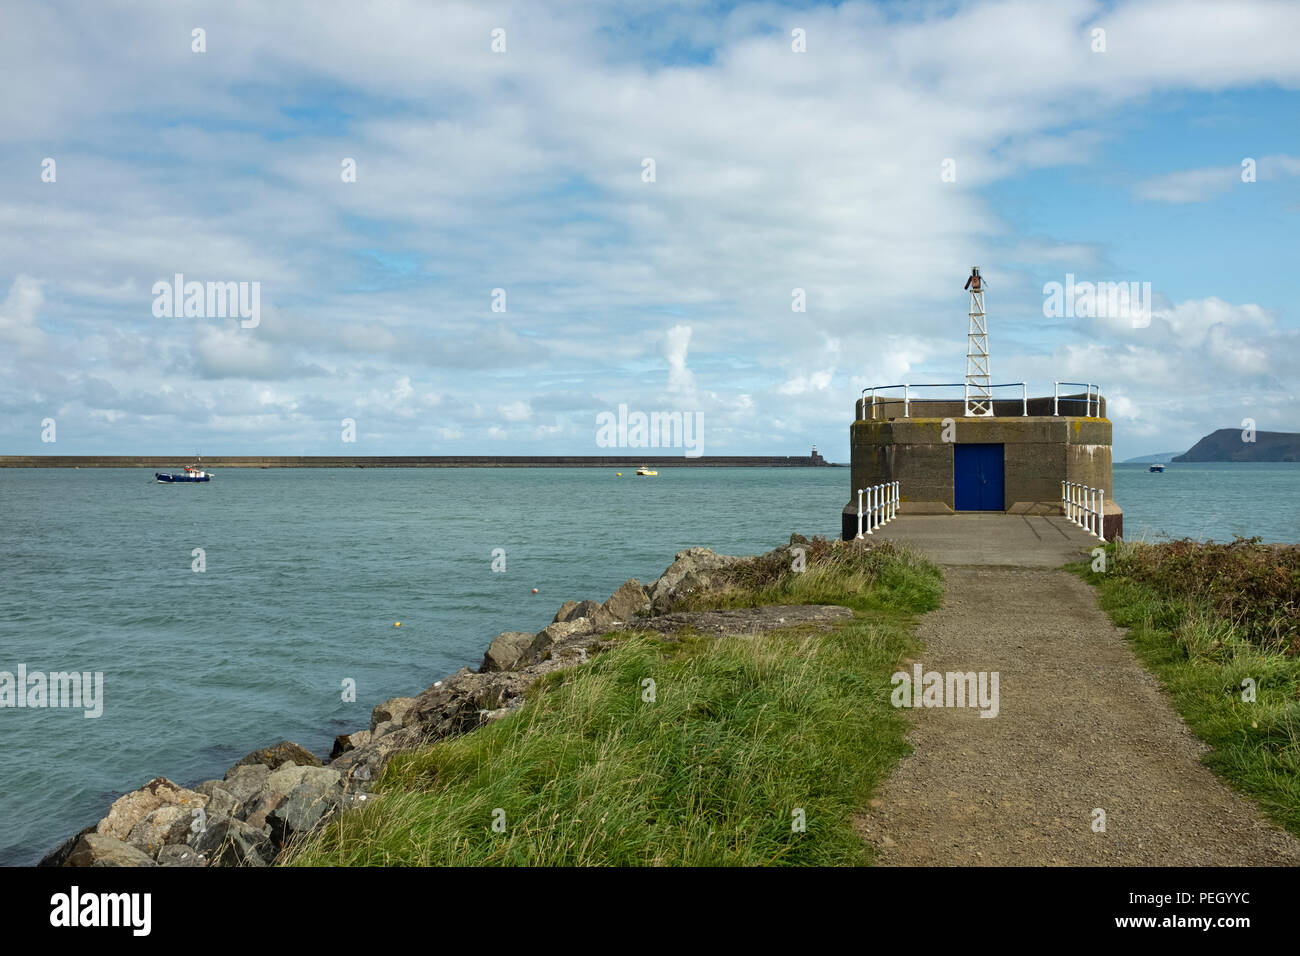 Light beacon at the end of a harbour breakwater. Stock Photo